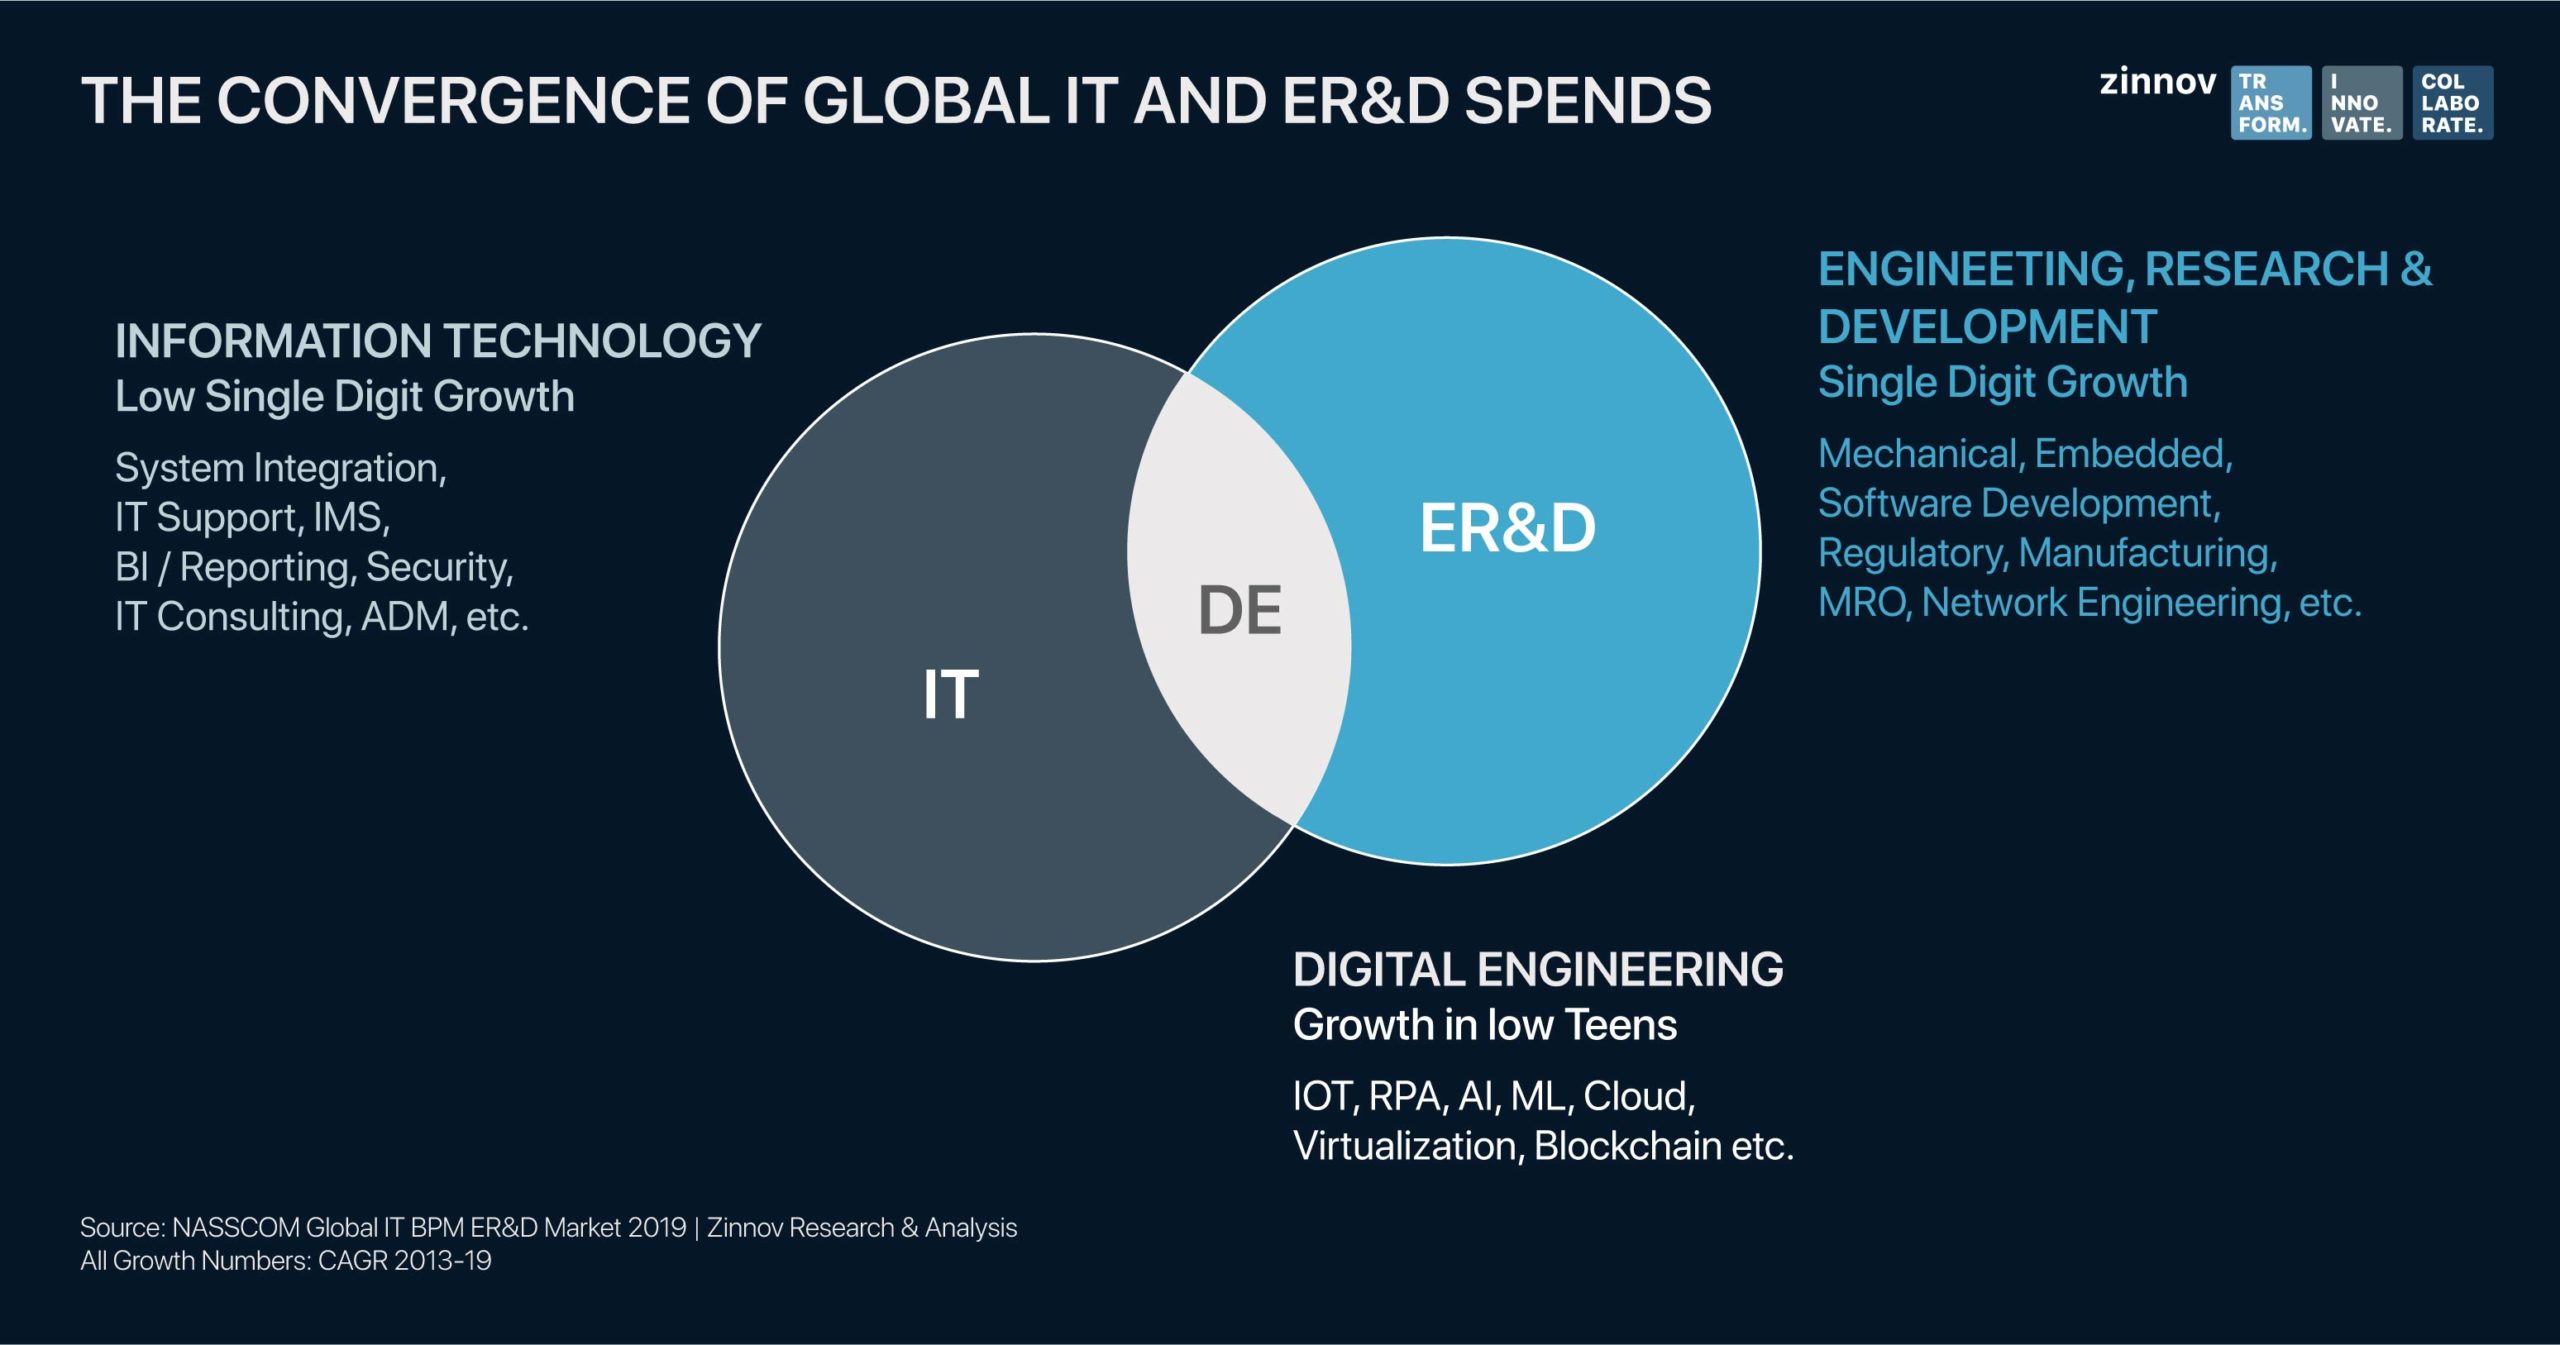 The Convergence of IT and ER & D spends